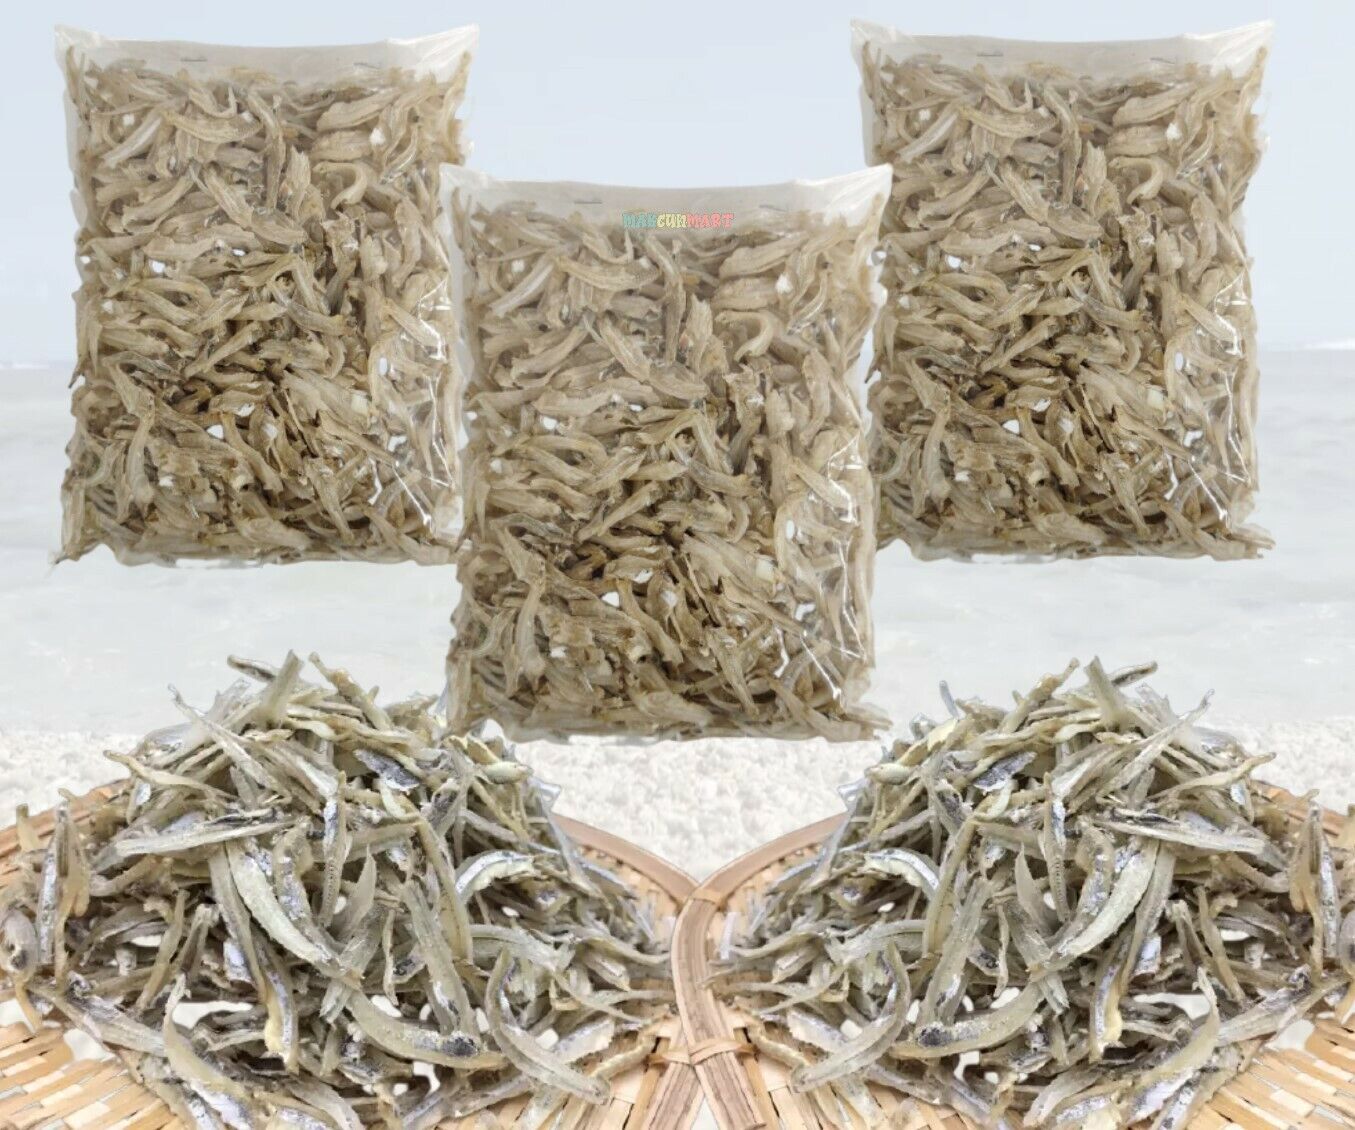 Cheap super special price Ikan Ranking TOP8 Bilis Kopek Dried Seafood Anchovy Cle Peeled Fish Anchovies